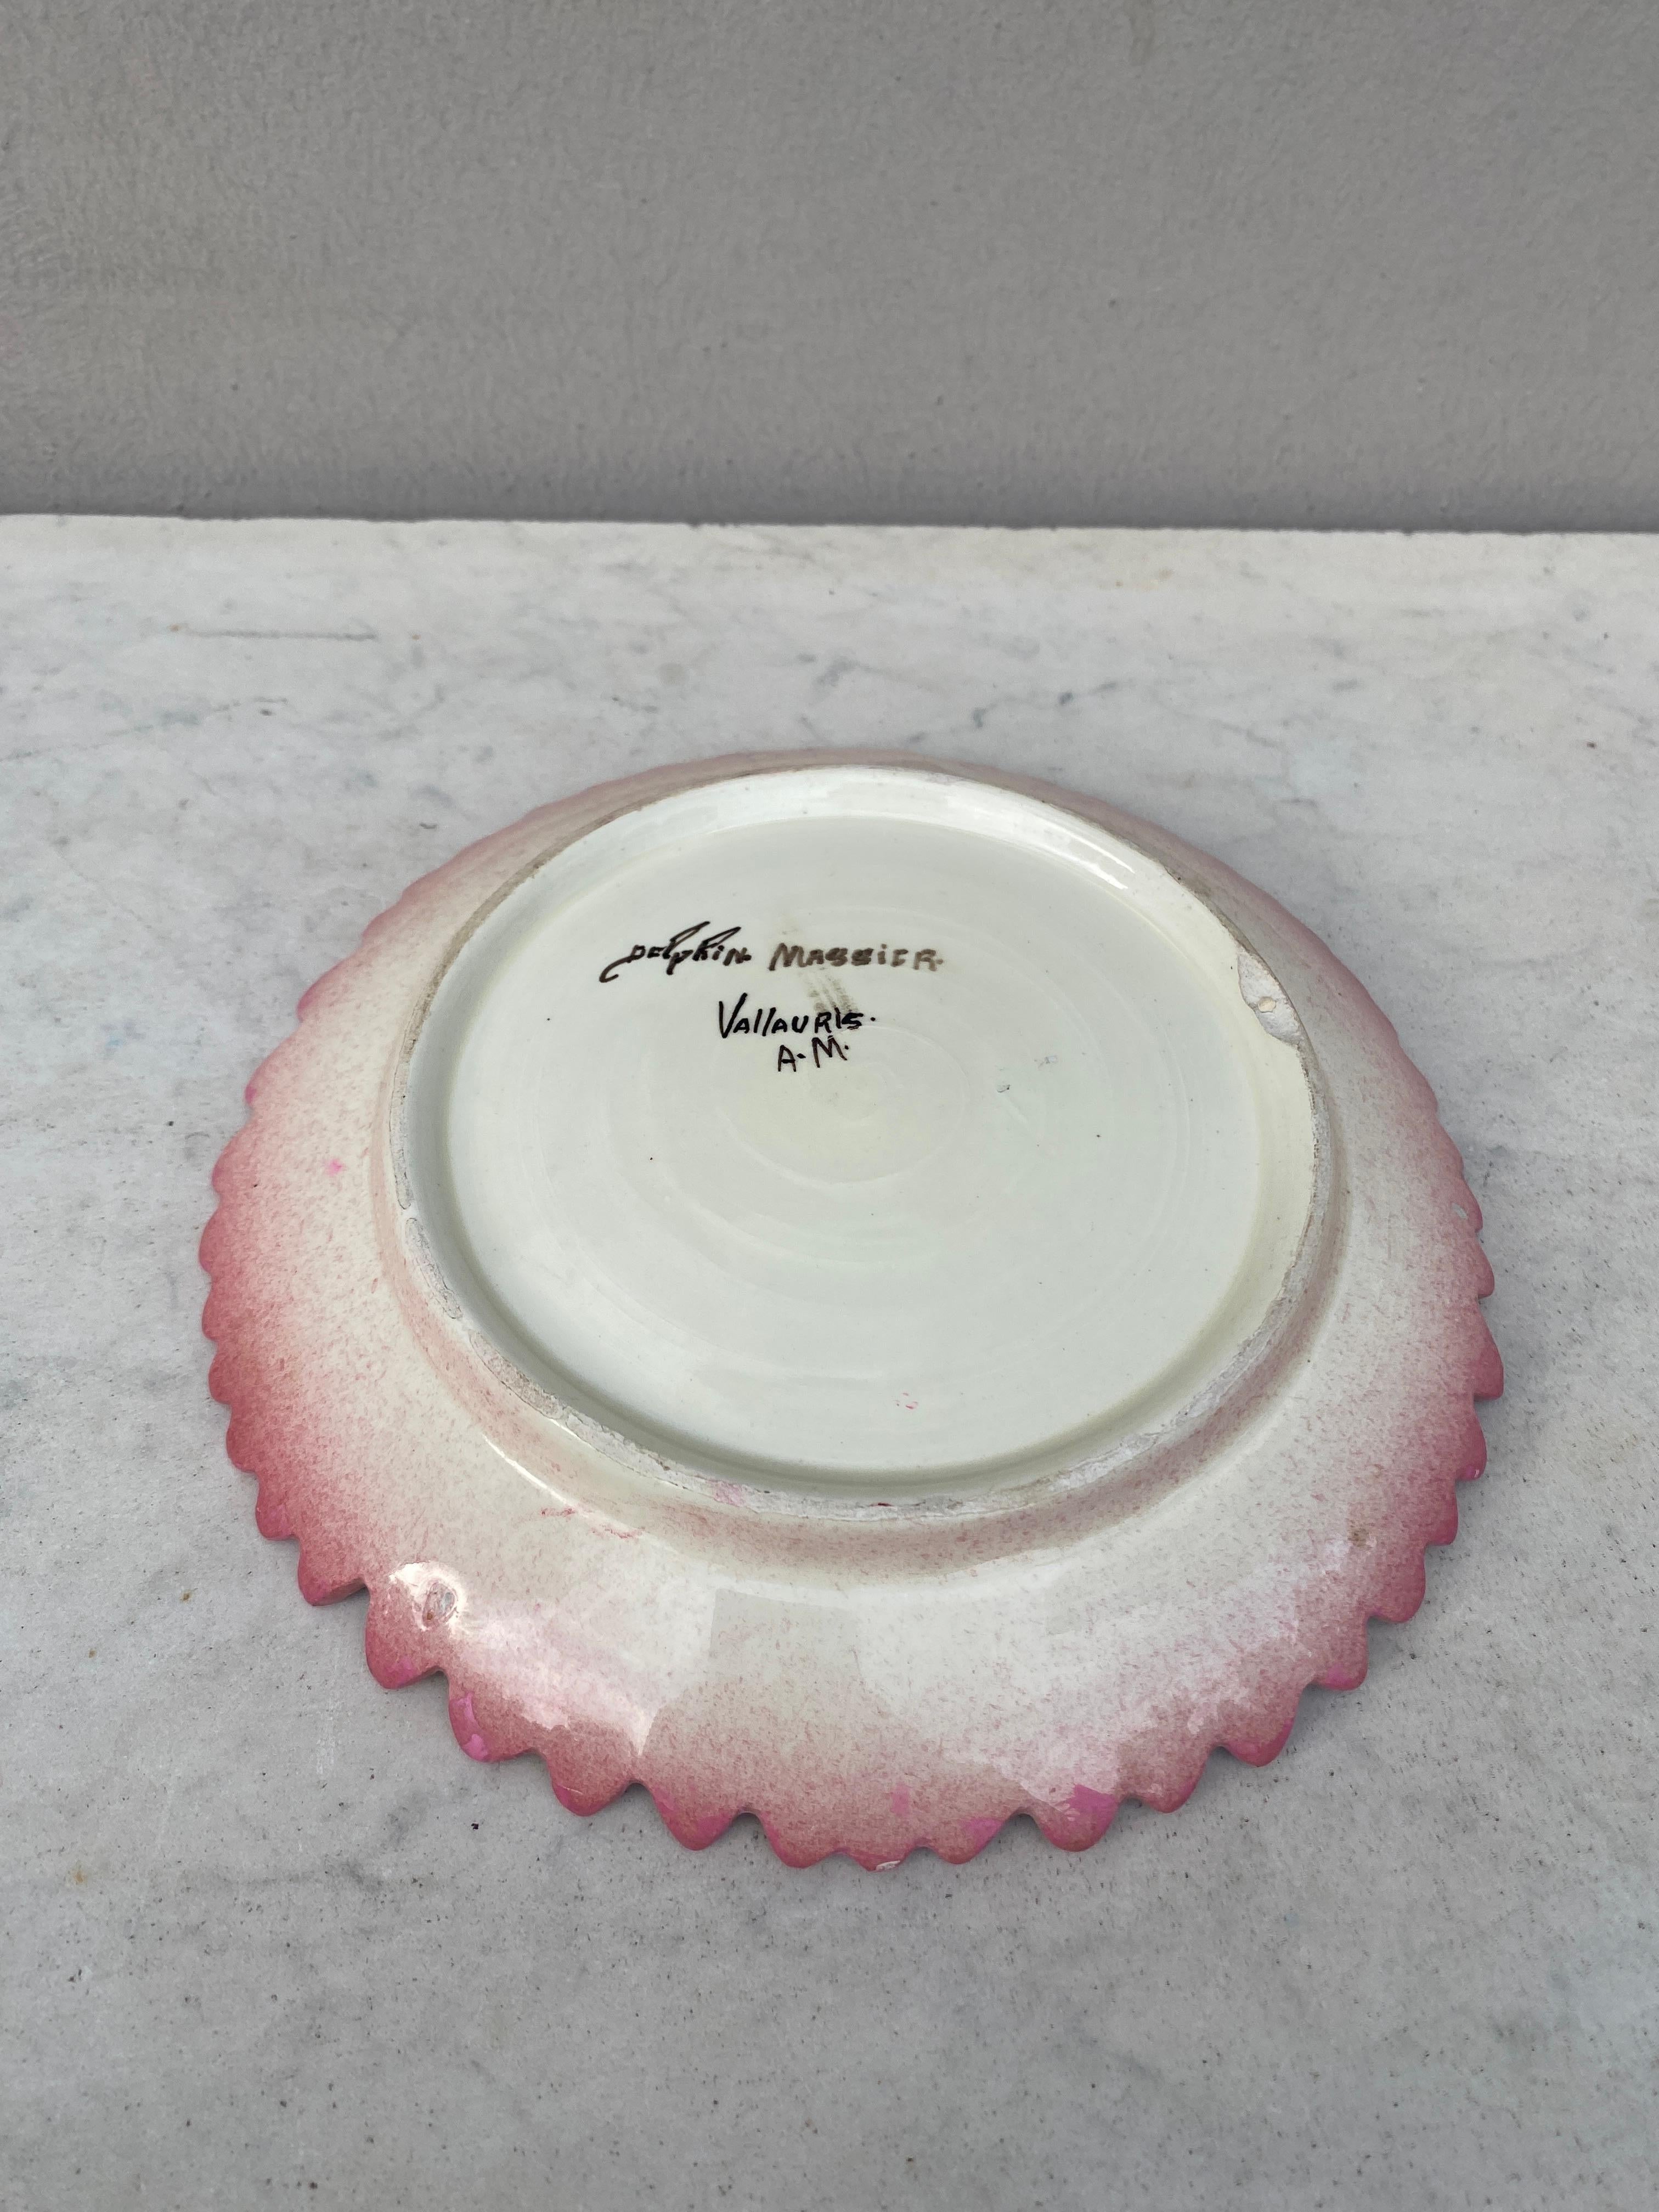 19th Century French Majolica Pink Daisy Plate Delphin Massier In Good Condition For Sale In Austin, TX